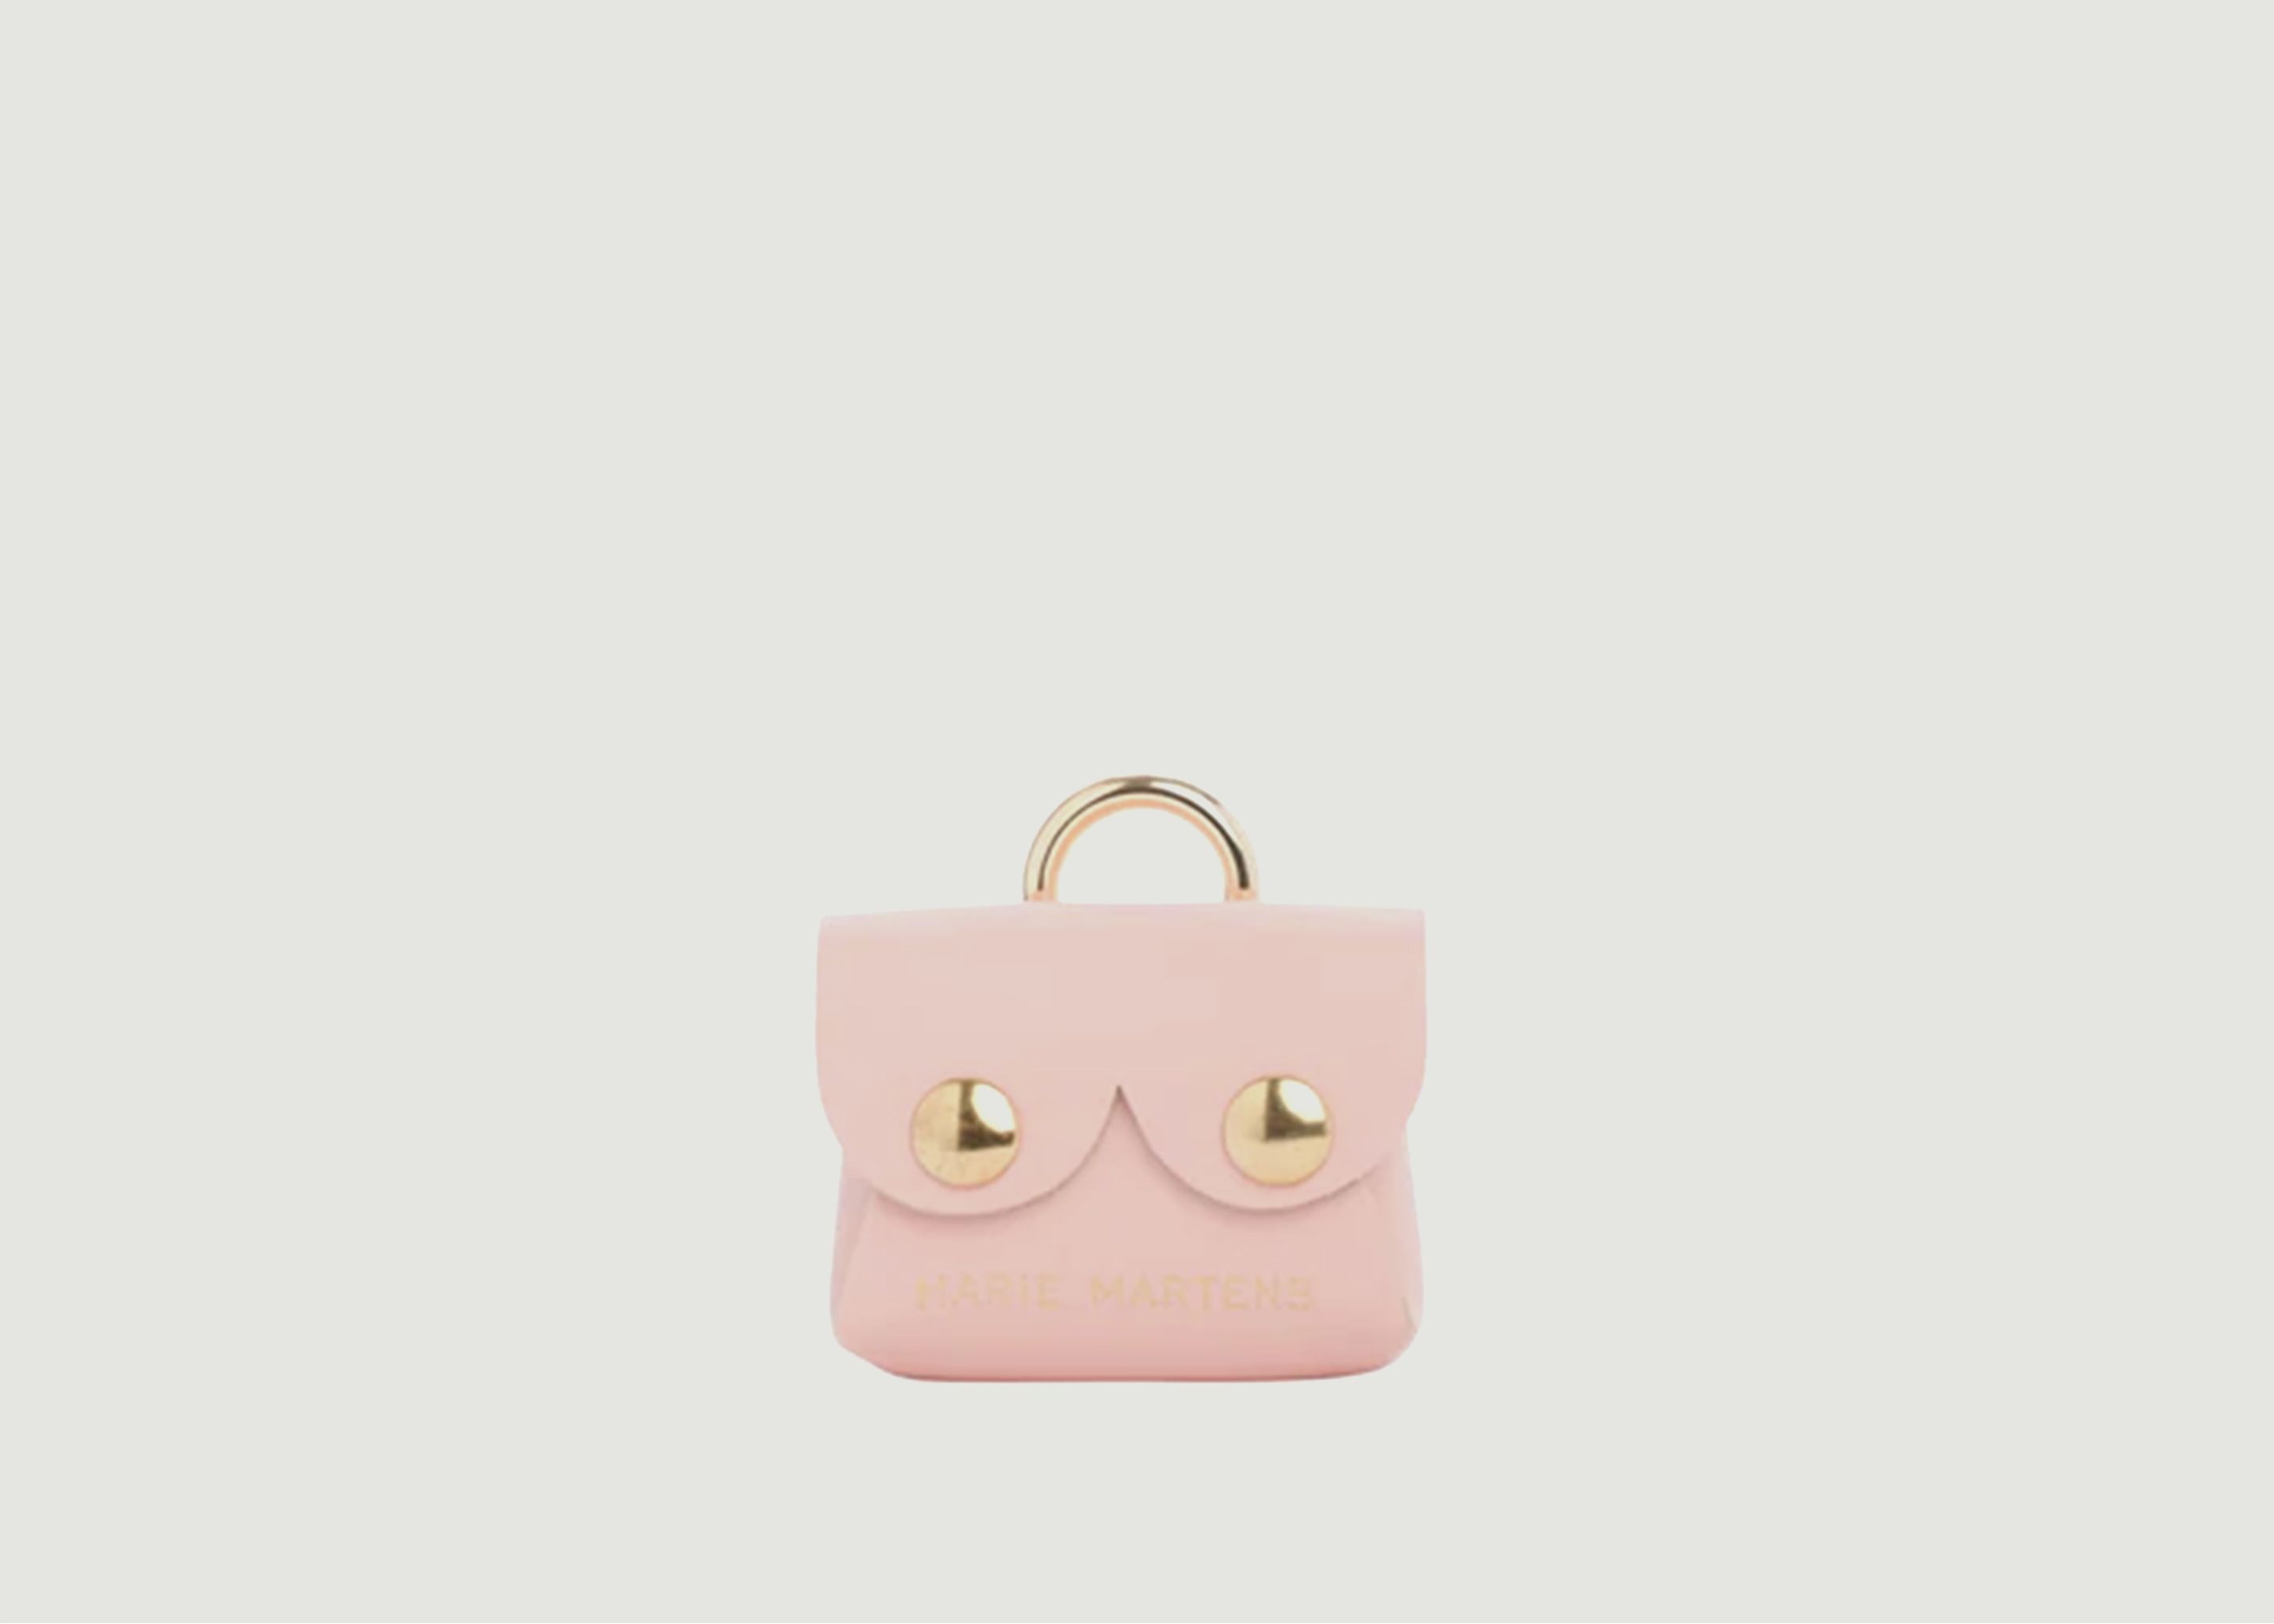 Choupy airpods boobs case - Marie Martens